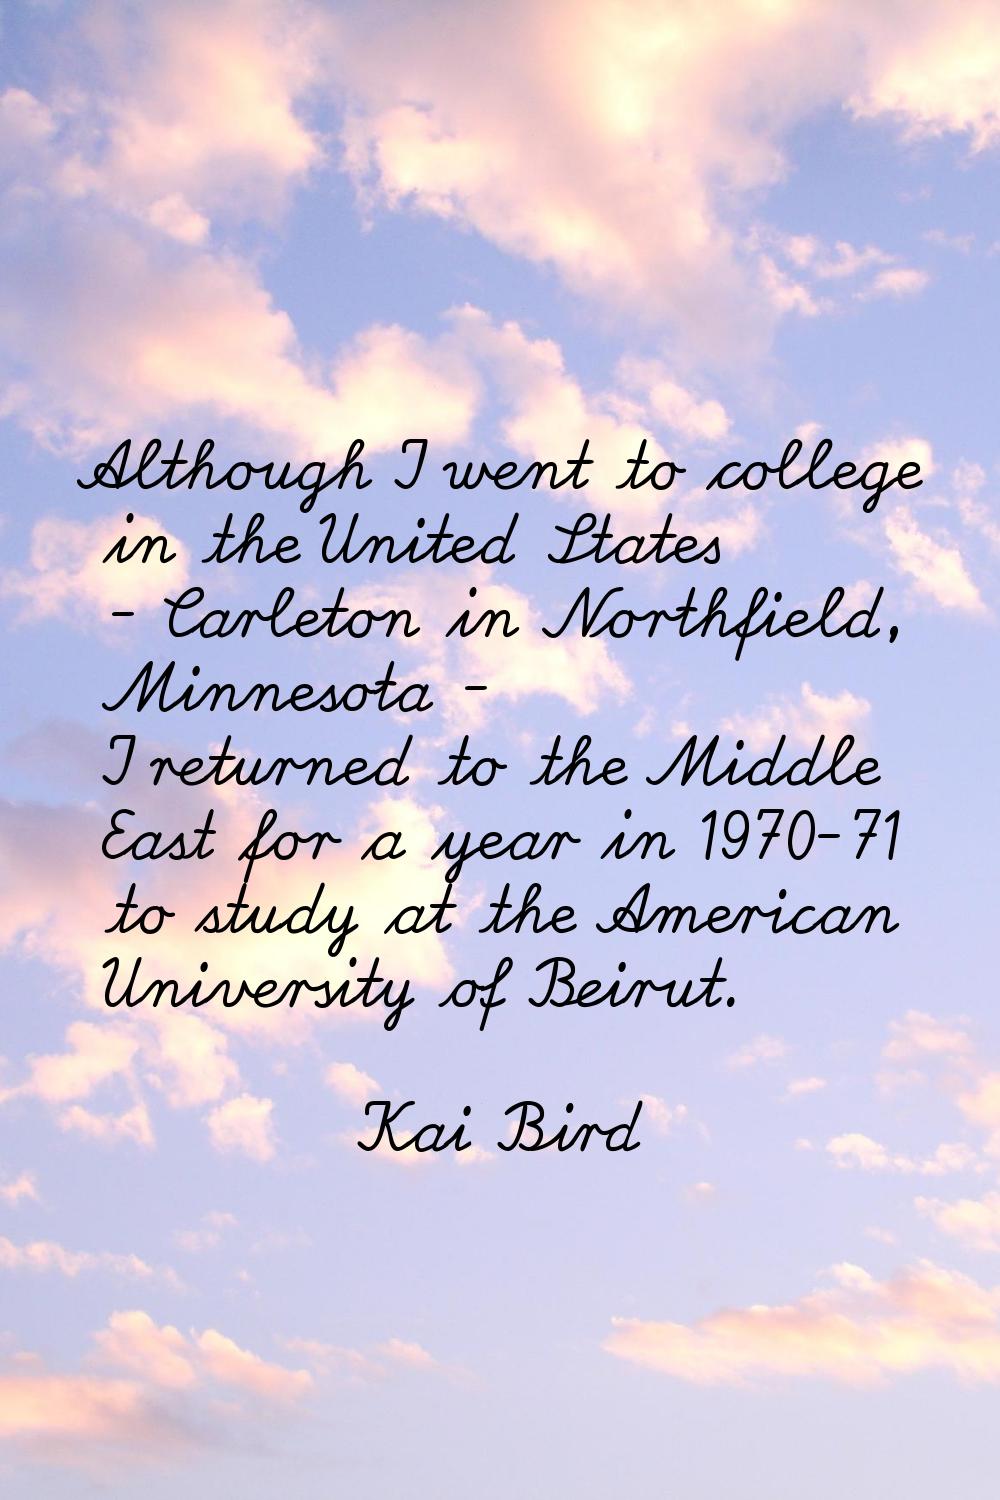 Although I went to college in the United States - Carleton in Northfield, Minnesota - I returned to